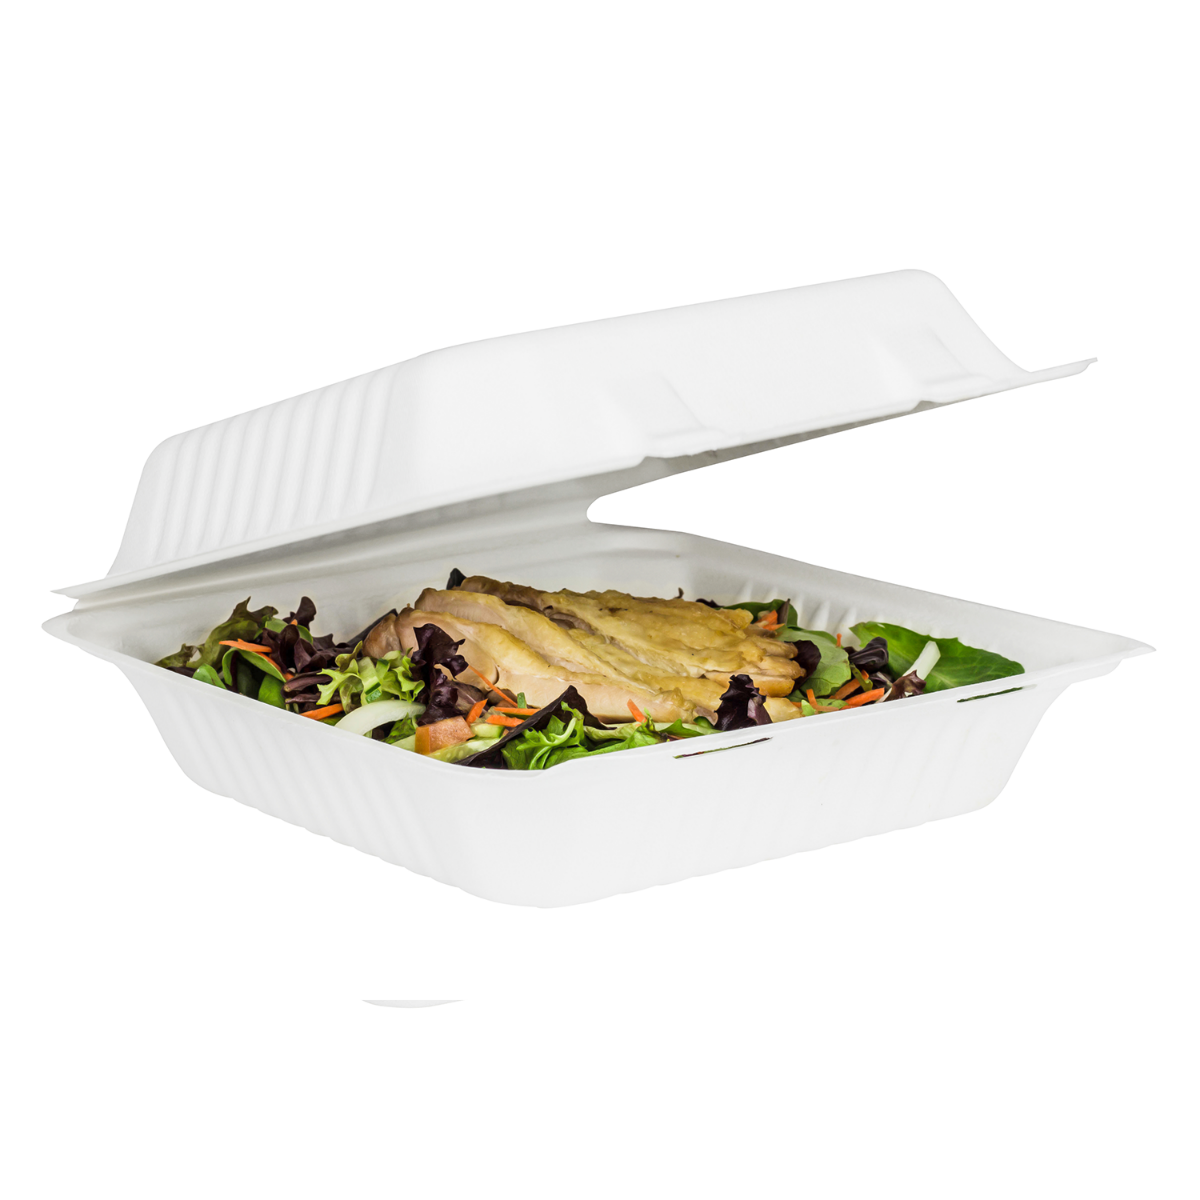 Small Biodegradable Takeout Boxes - Karat Earth 6''x6'' Compostable Ba